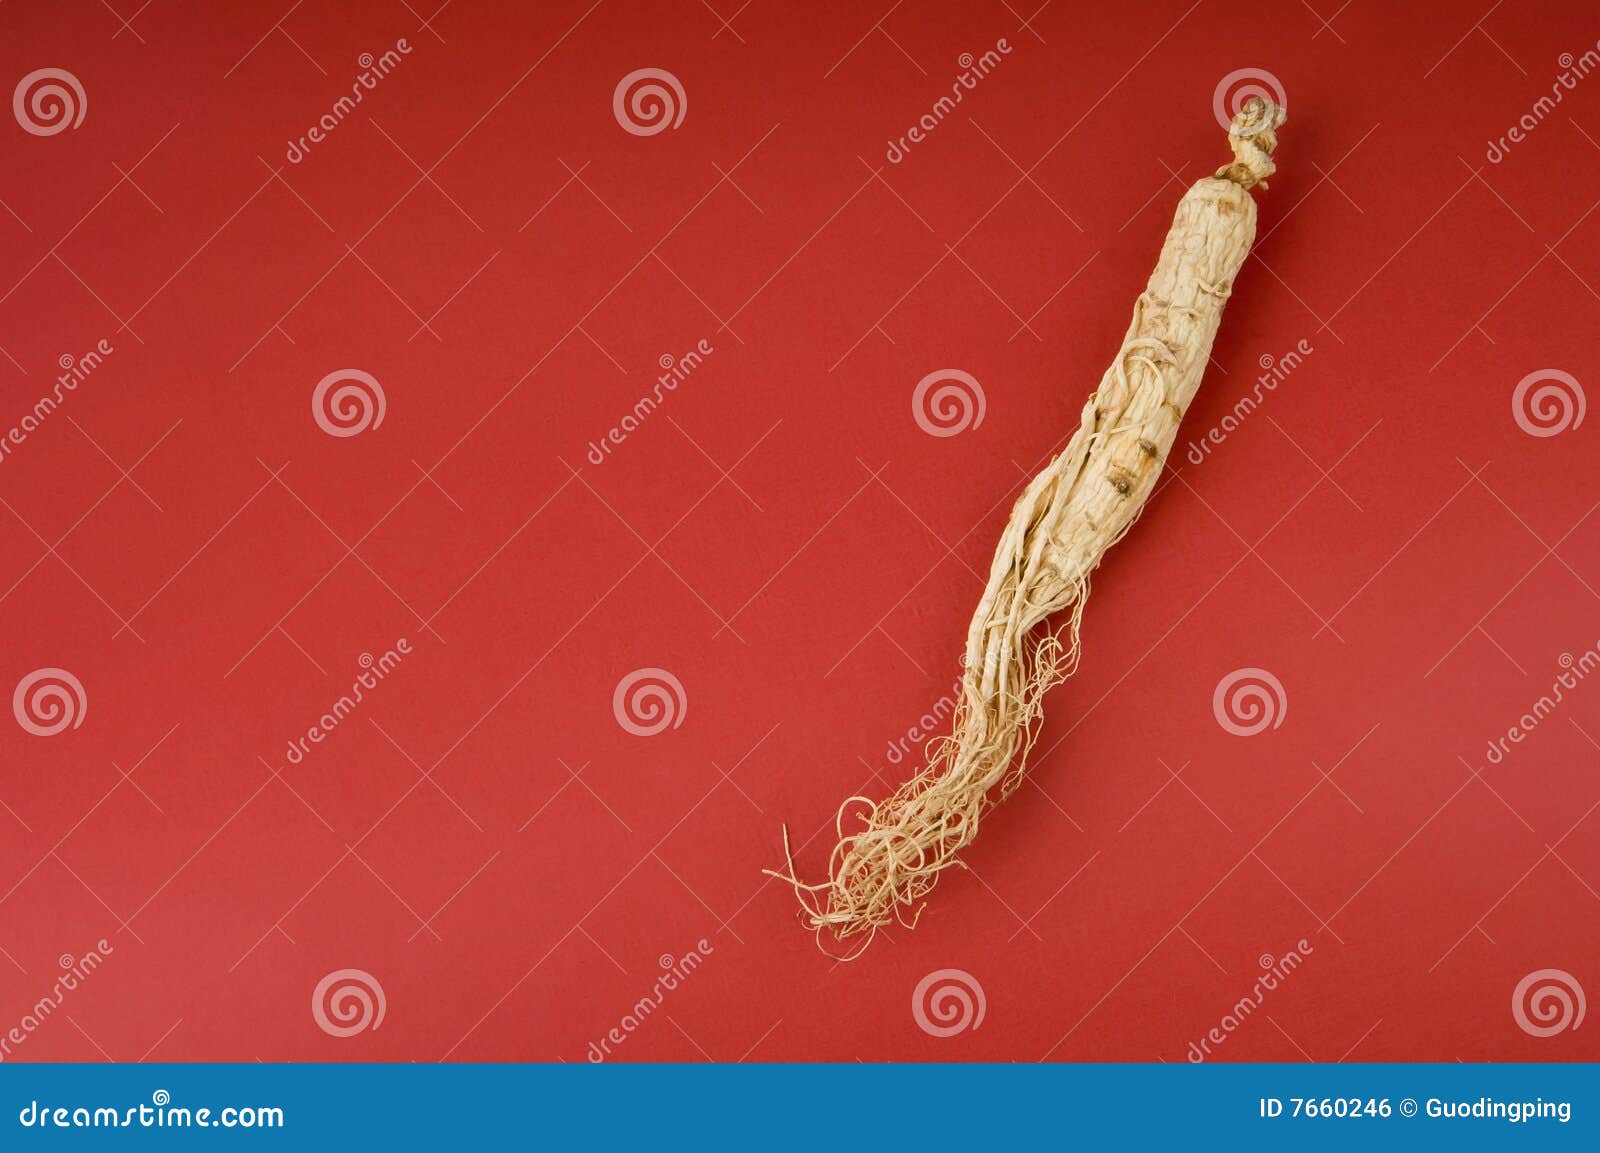 ginseng on red